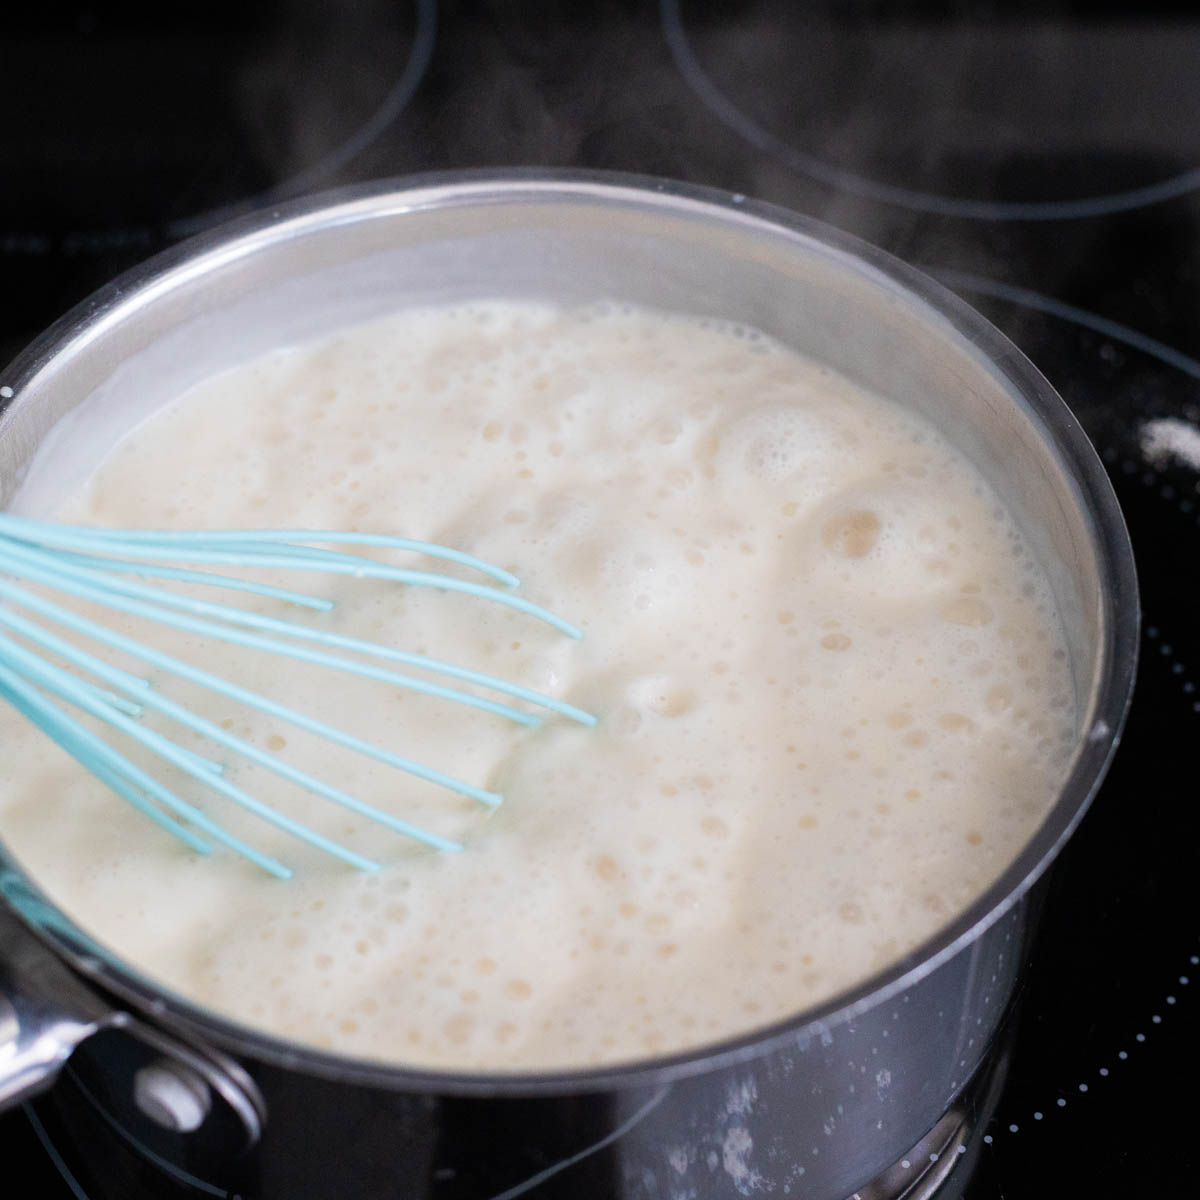 The saucepan of bourbon sauce is at a rolling boil and the whisk is stirring it.